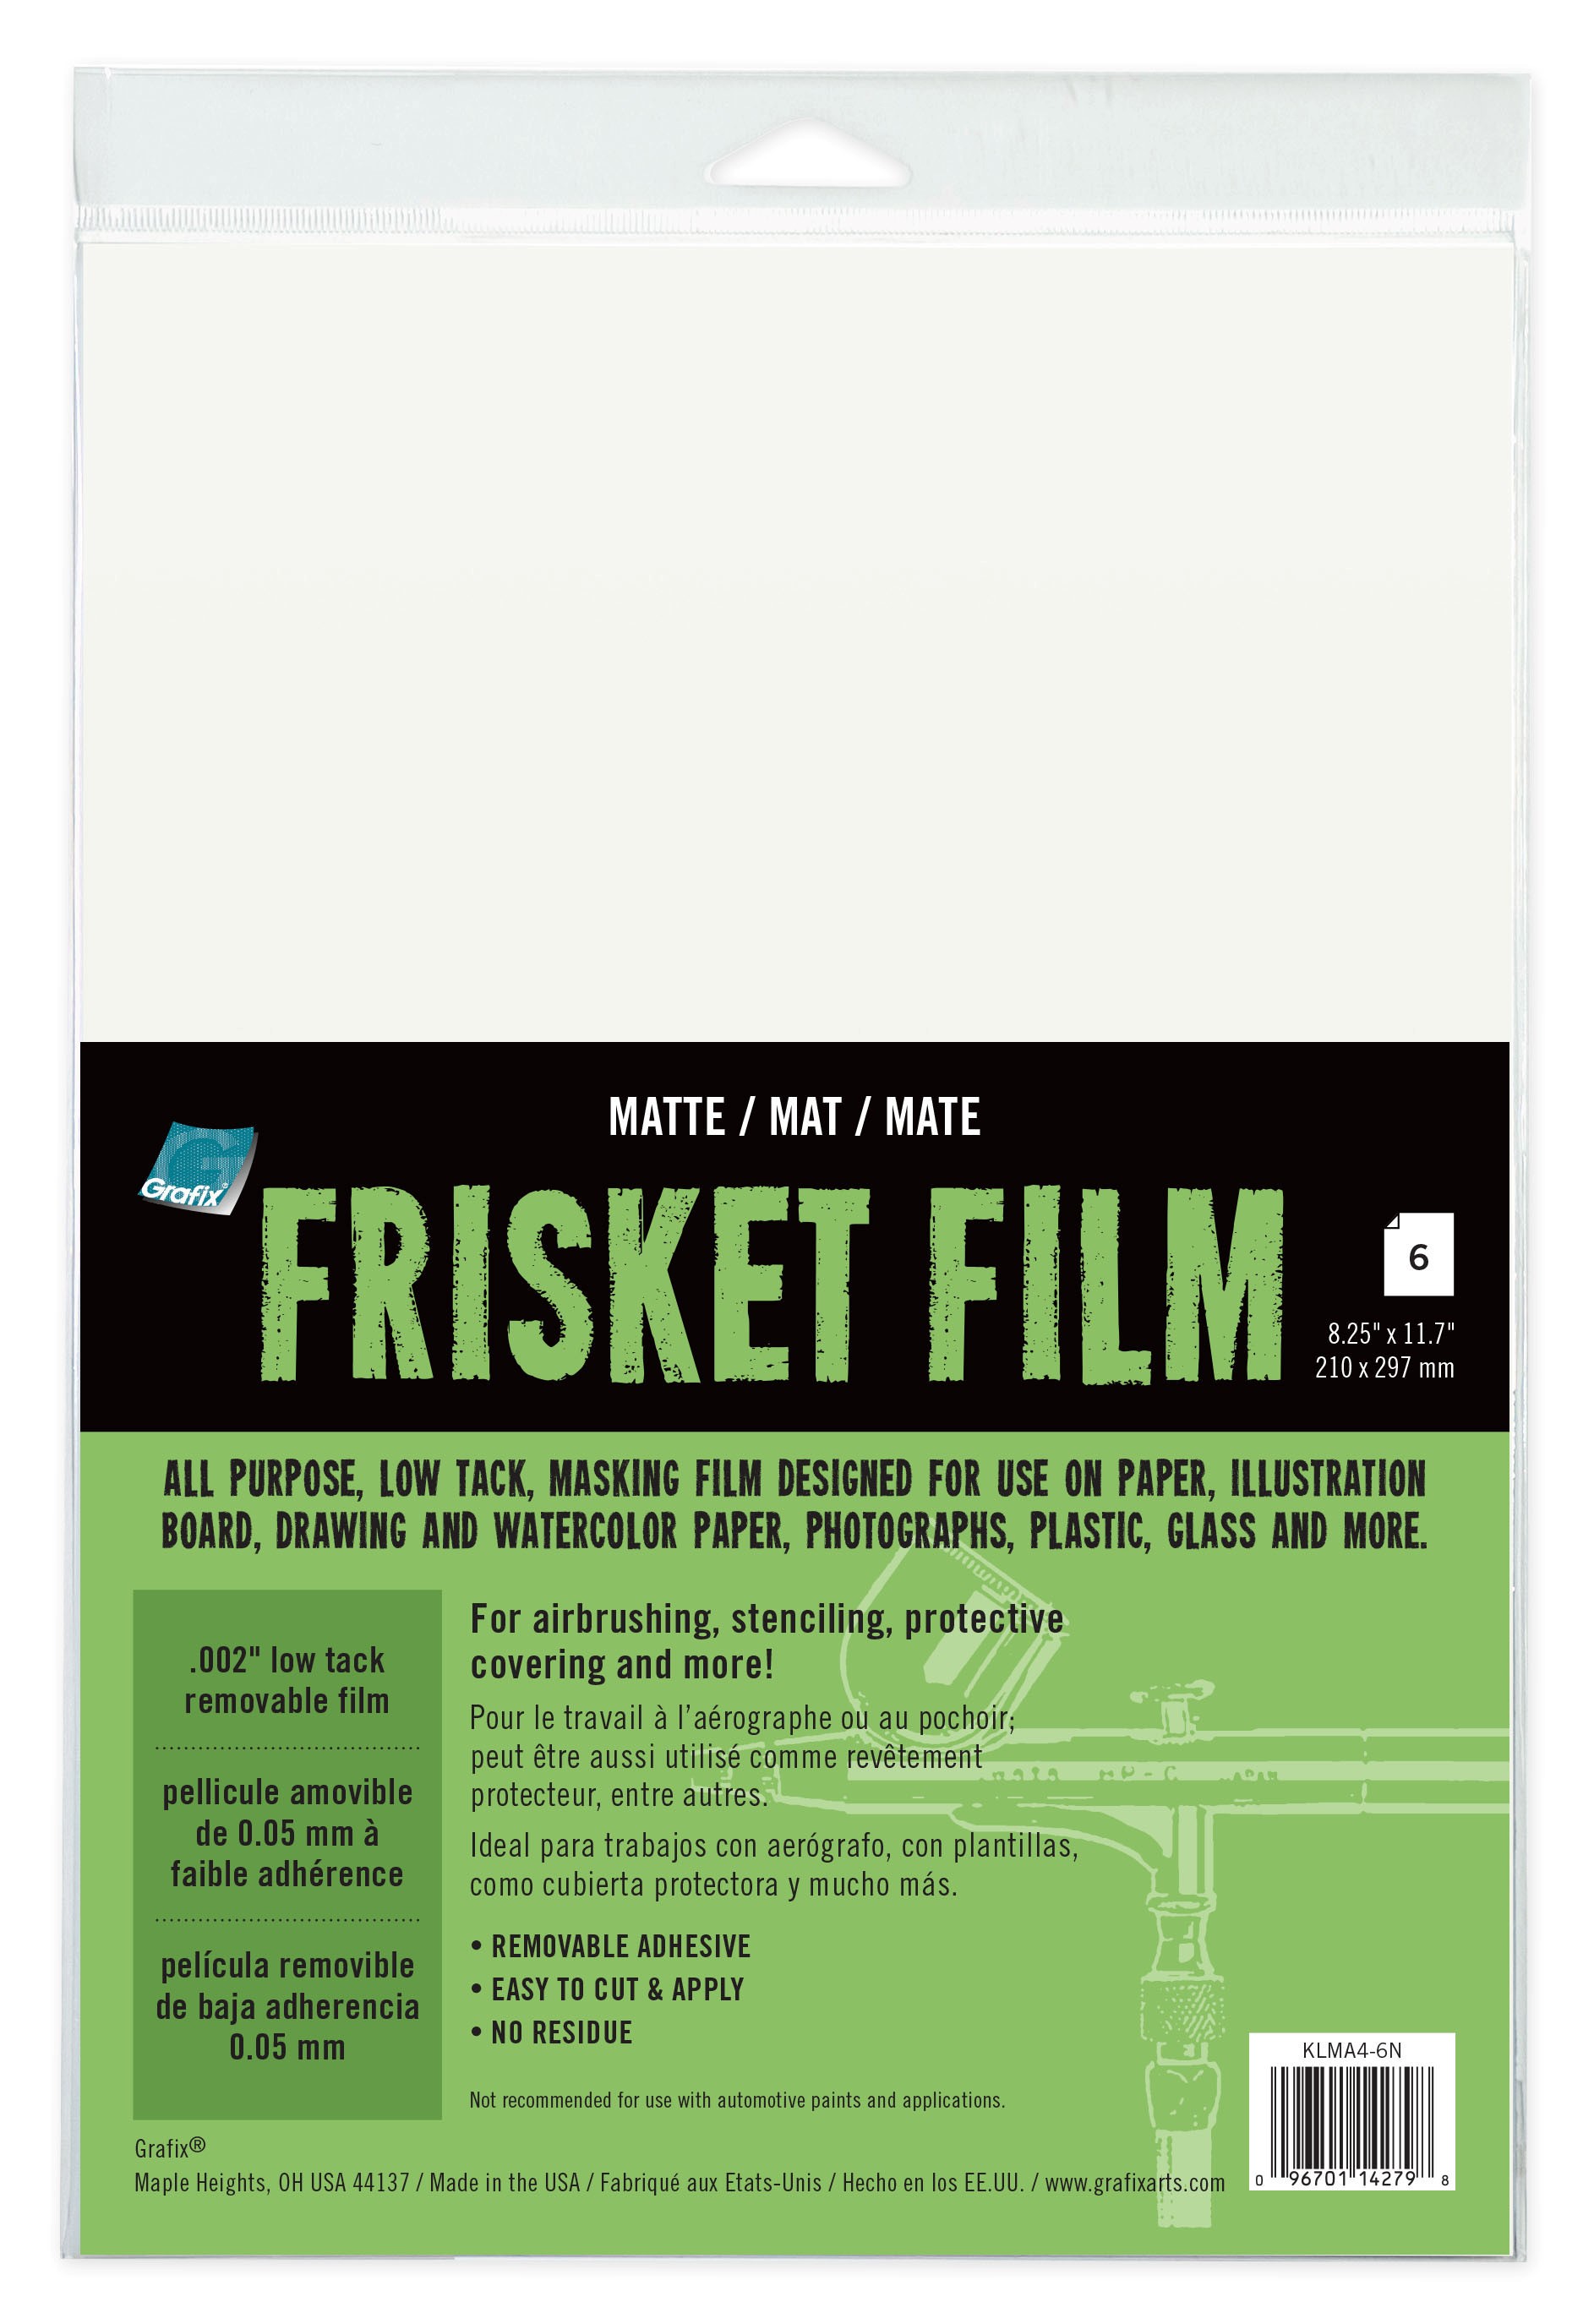 GRAFIX grafix extra tack frisket self-adhering removeable adhesive film,  for airbrushing, retouching, stencils, rubber stamping, wat